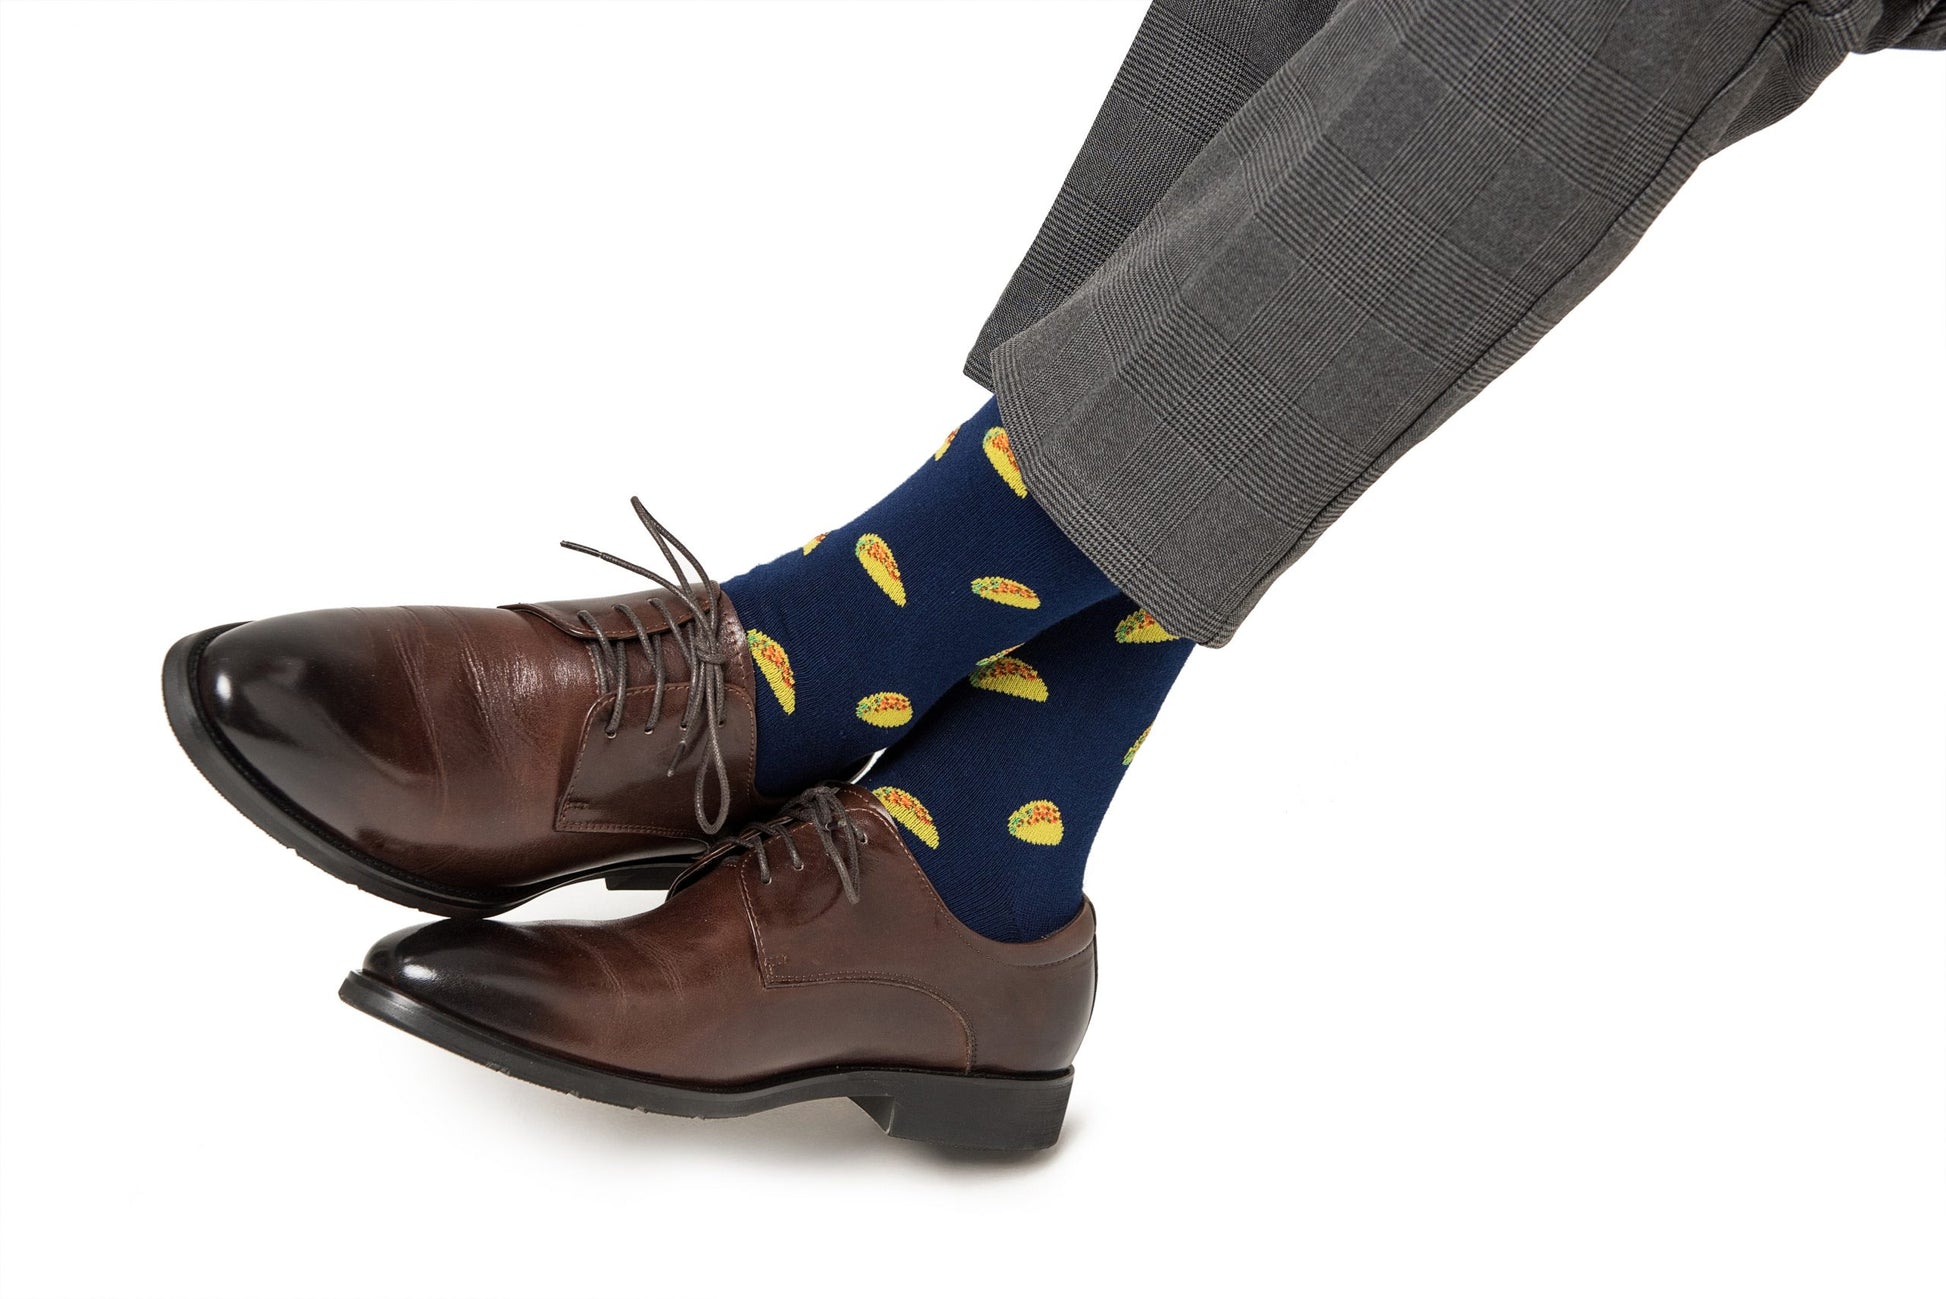 Brown dress shoes with grey trousers and Taco Socks featuring lemon prints.